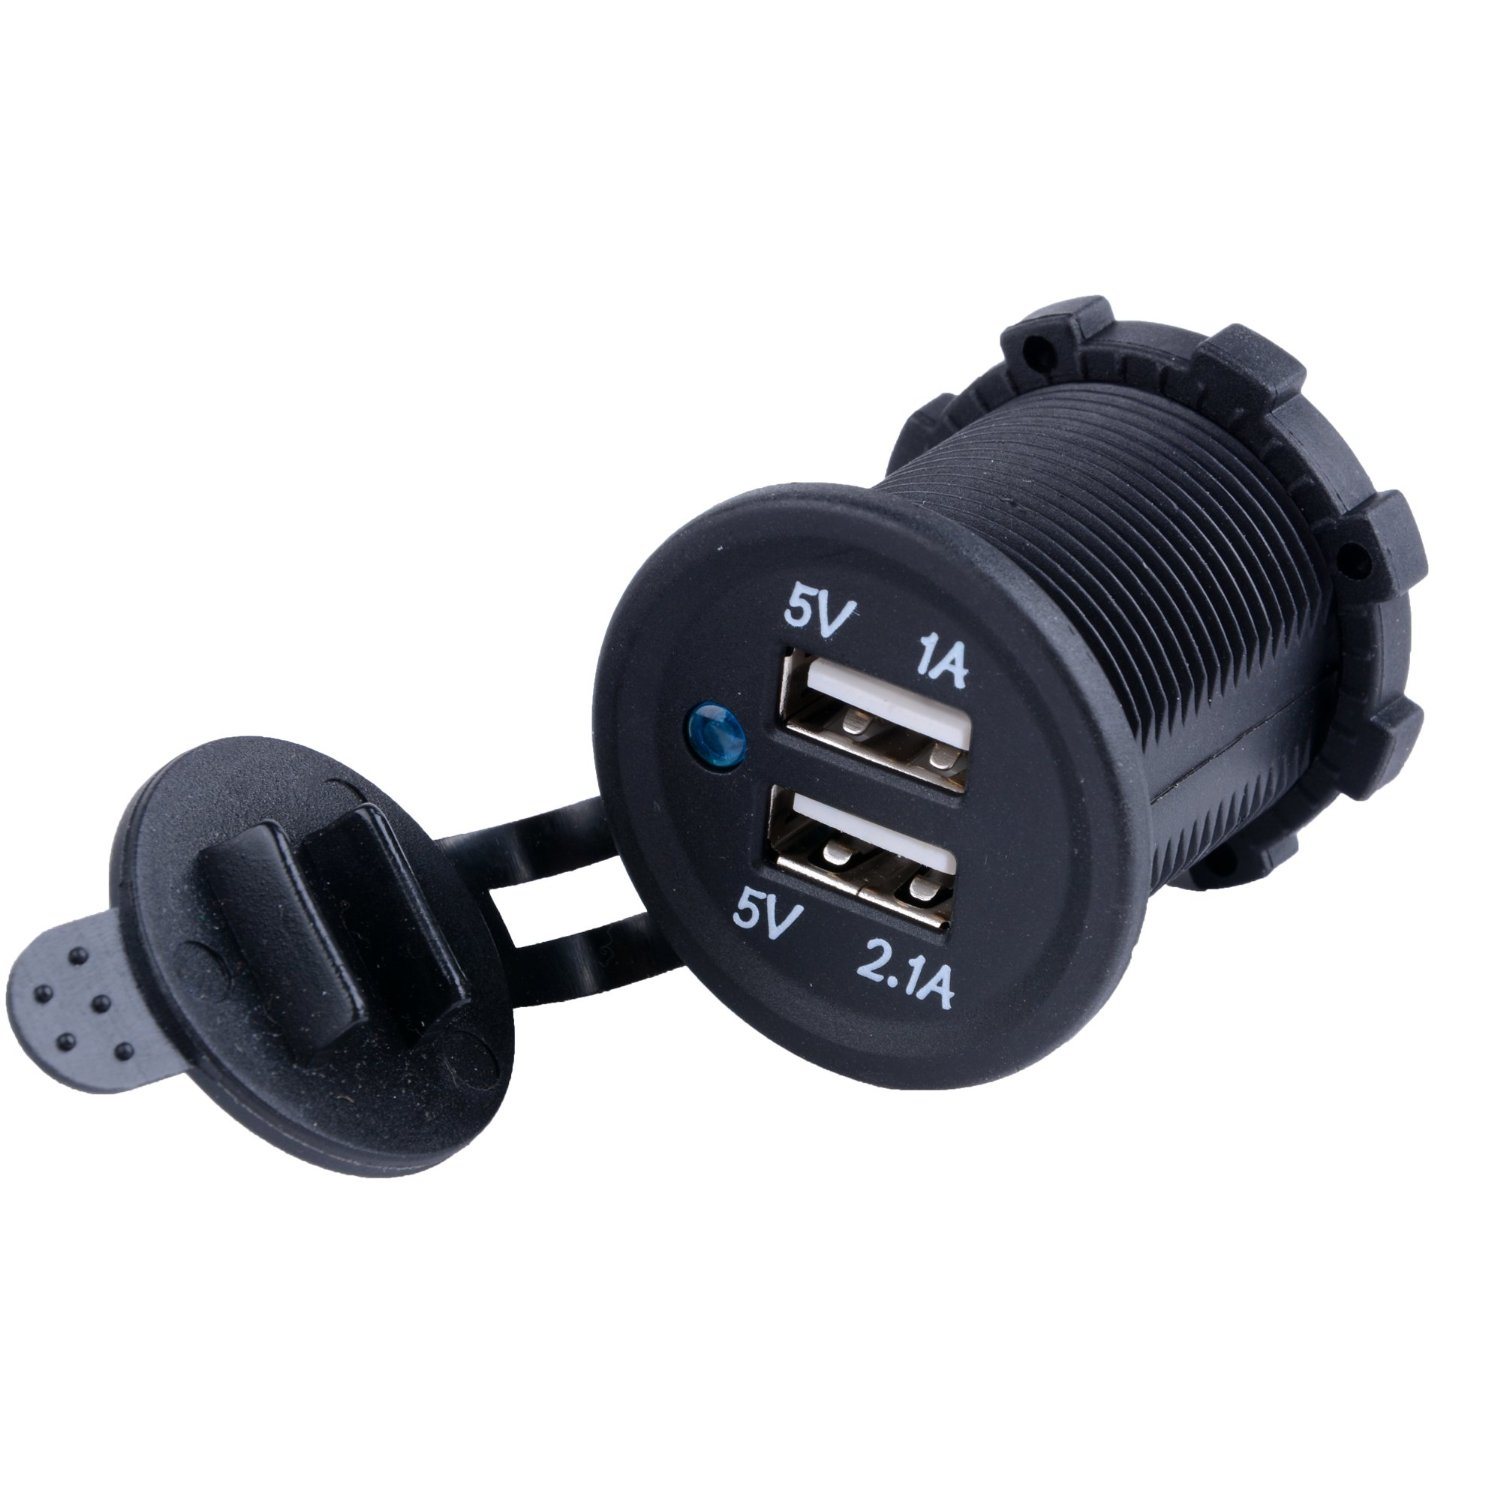 Waterproof Dual USB Charger Socket for Boat / RV / Car / Motor-Home